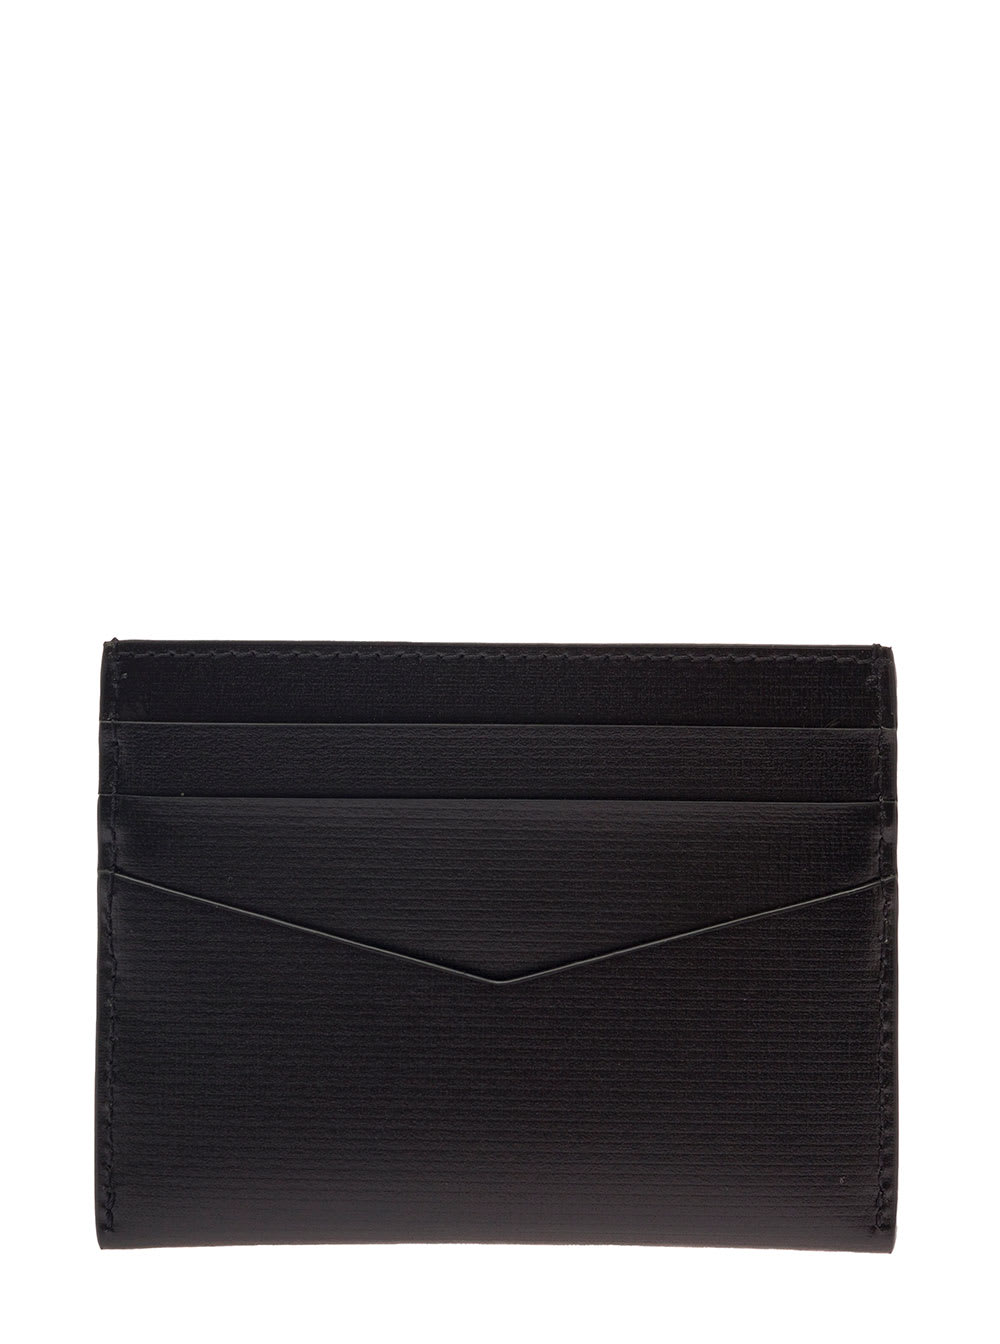 Shop Givenchy Black Cardholder With Silver Logo Embossed At The Front In Leather Man